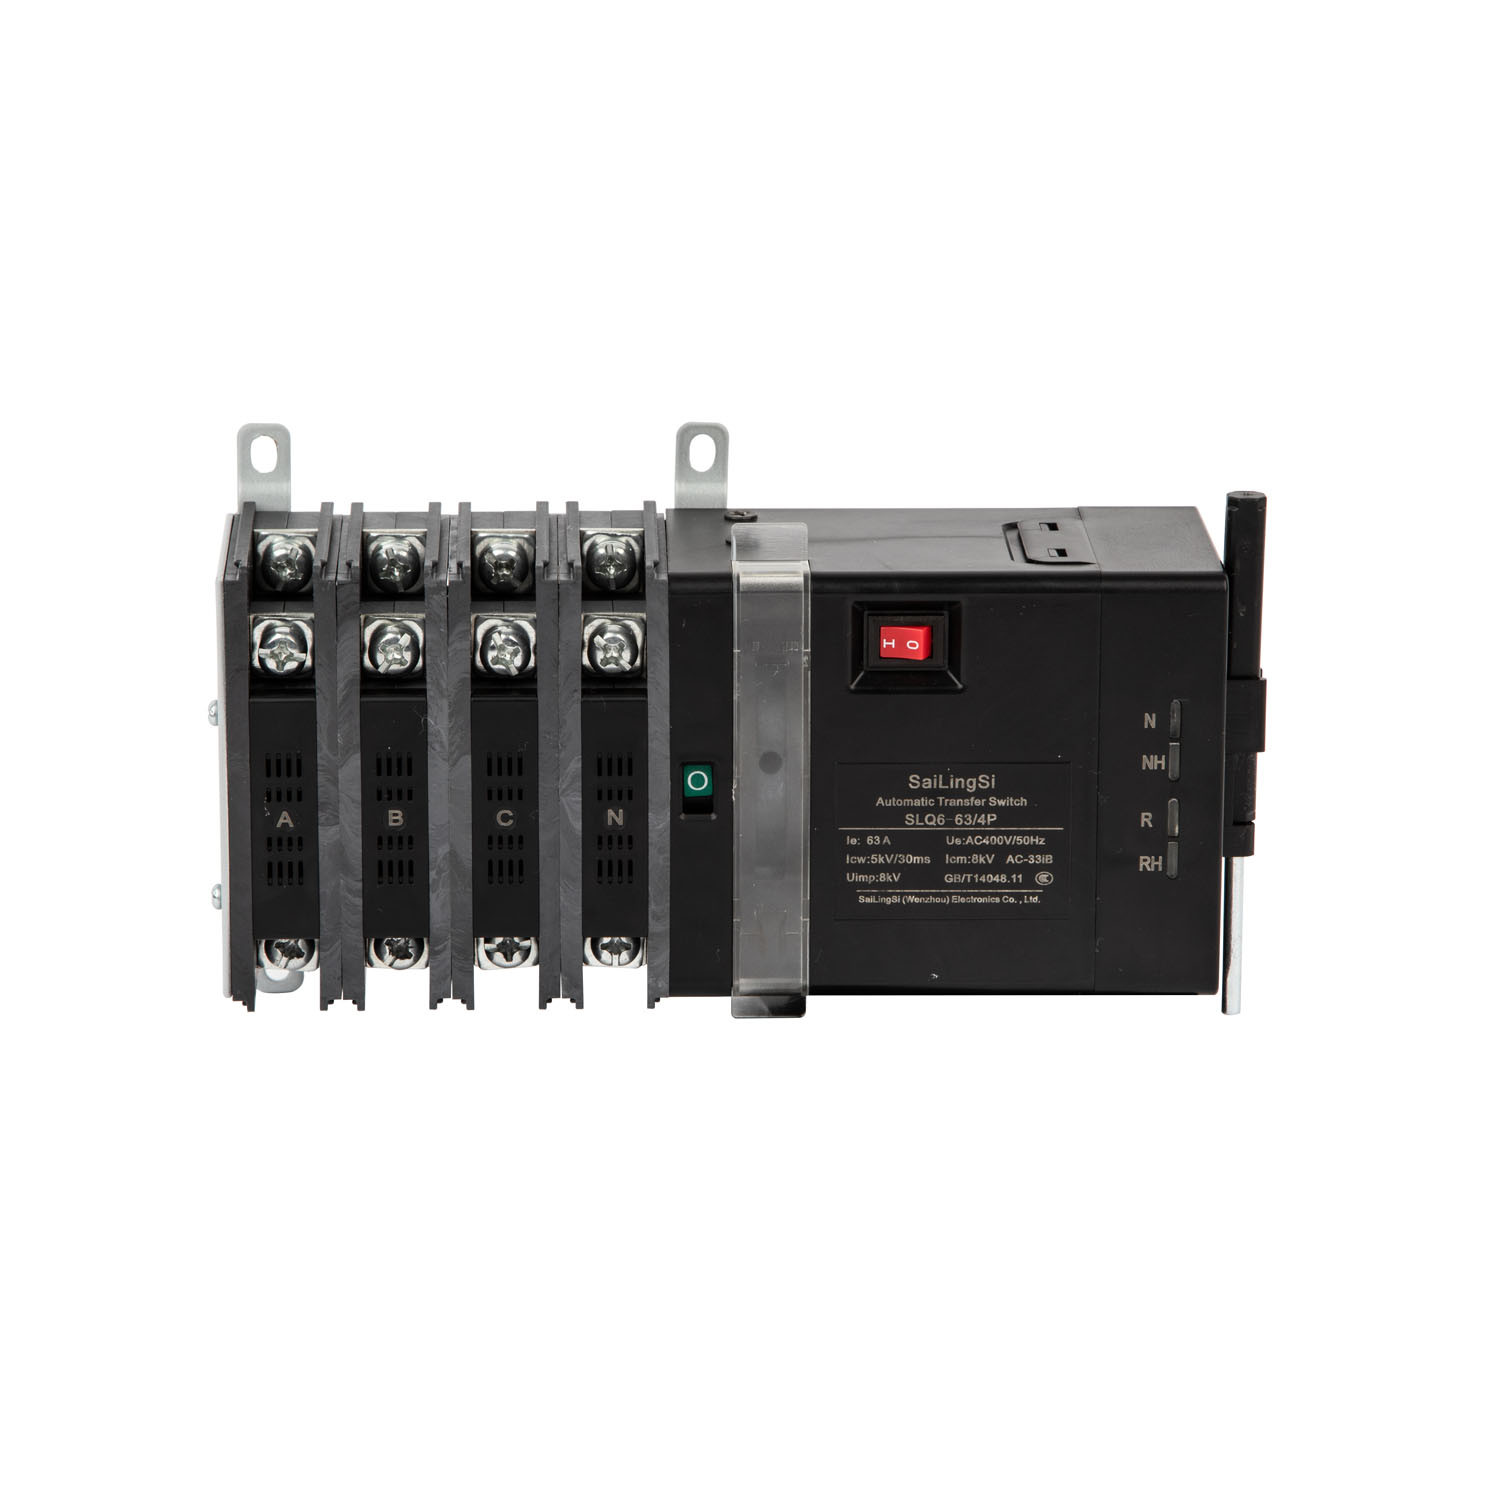 Solar Power to City Power ATS 630A 3p Automatic Transfer Switch ATS with Fire Control